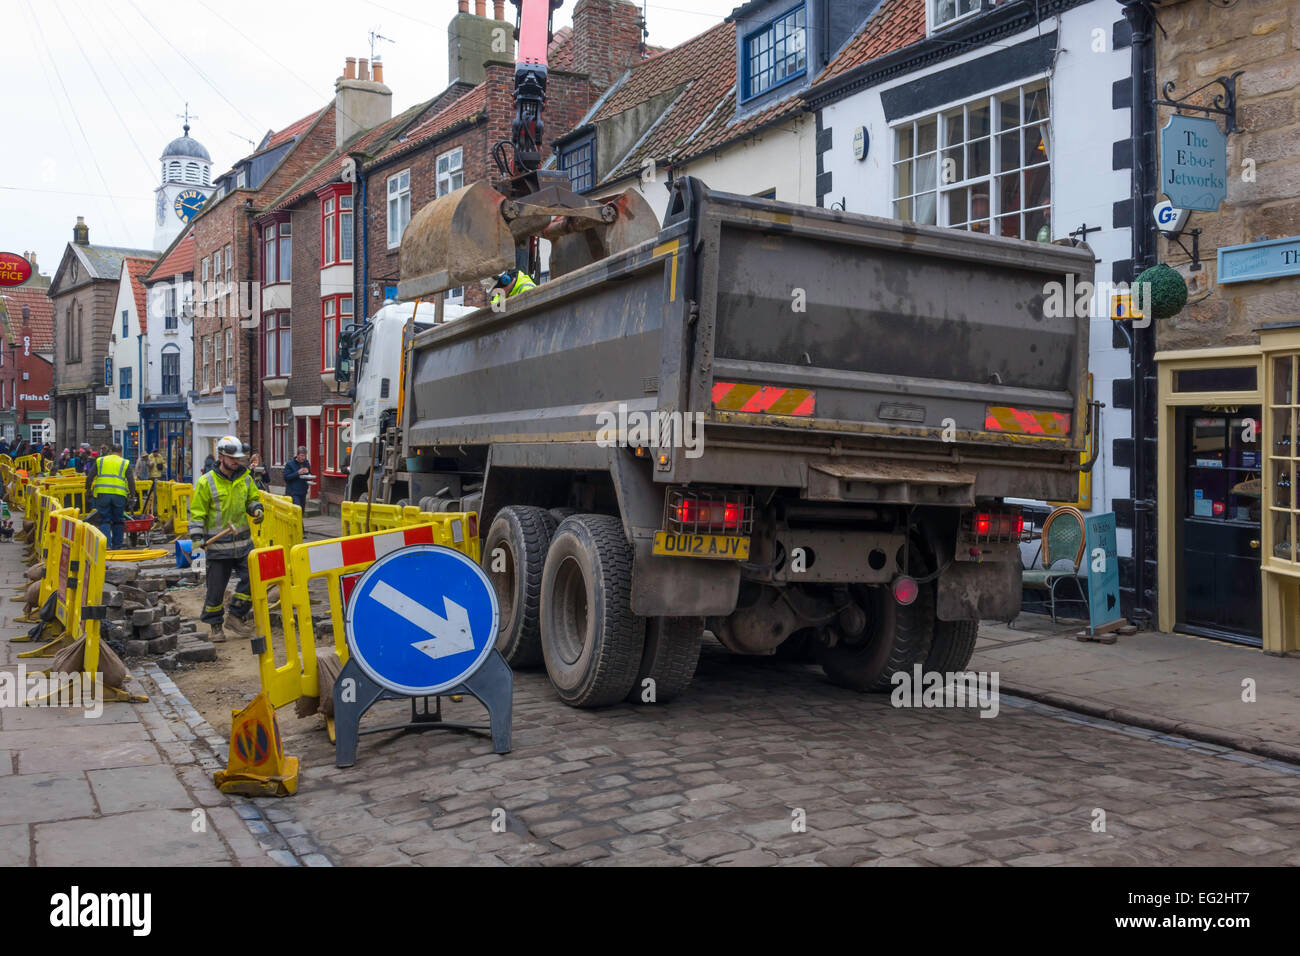 Inconvenient blockage by contractors truck while repairing a gas main in narrow cobbled  Church Street Whitby North Yorkshire. Stock Photo